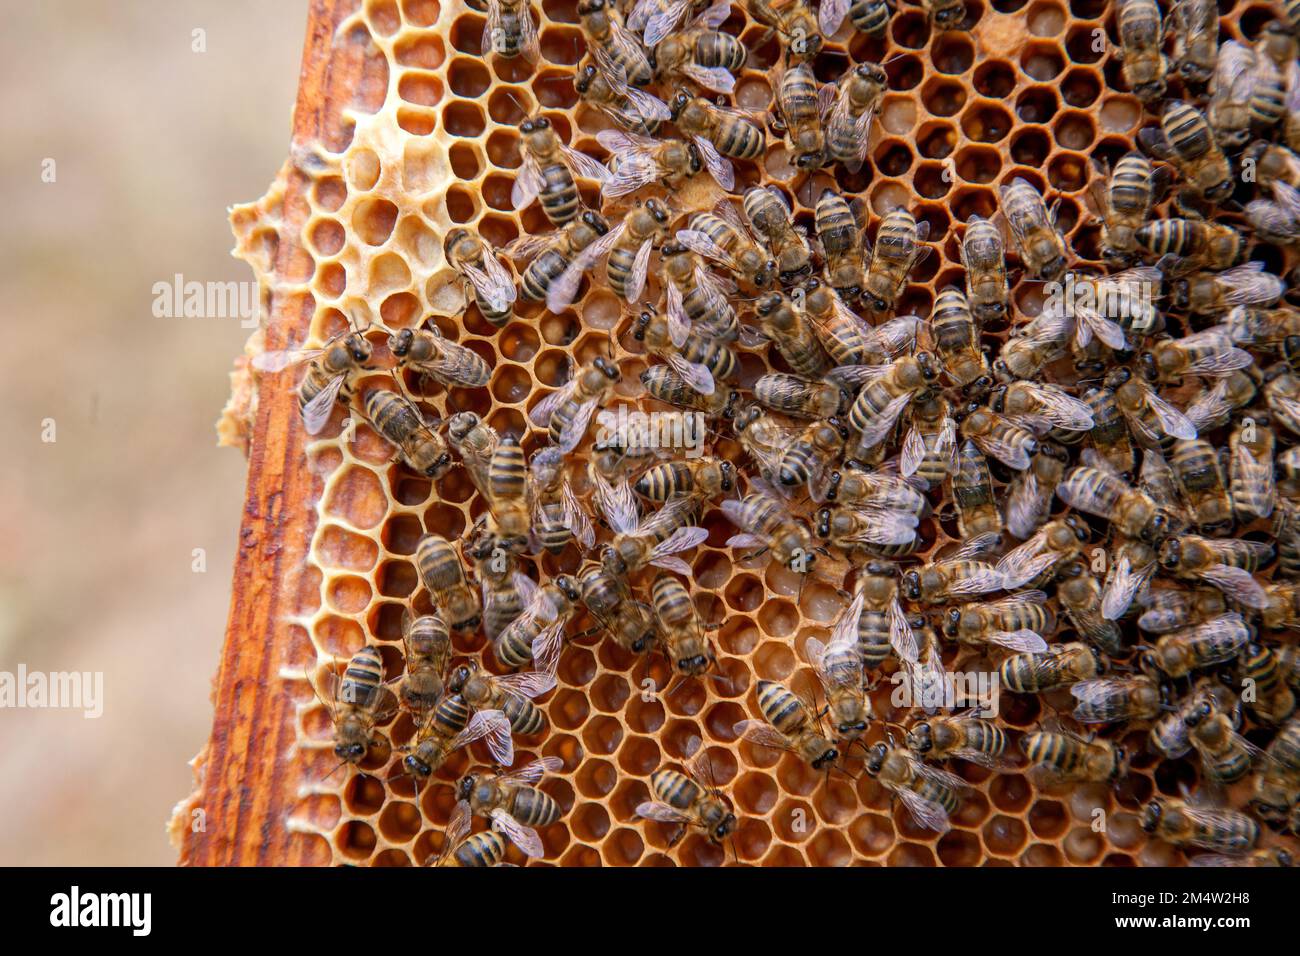 Frames of a beehive. Busy bees inside the hive with open and sealed cells for their young. Birth of o a young bees. Close up showing some animals, hon Stock Photo